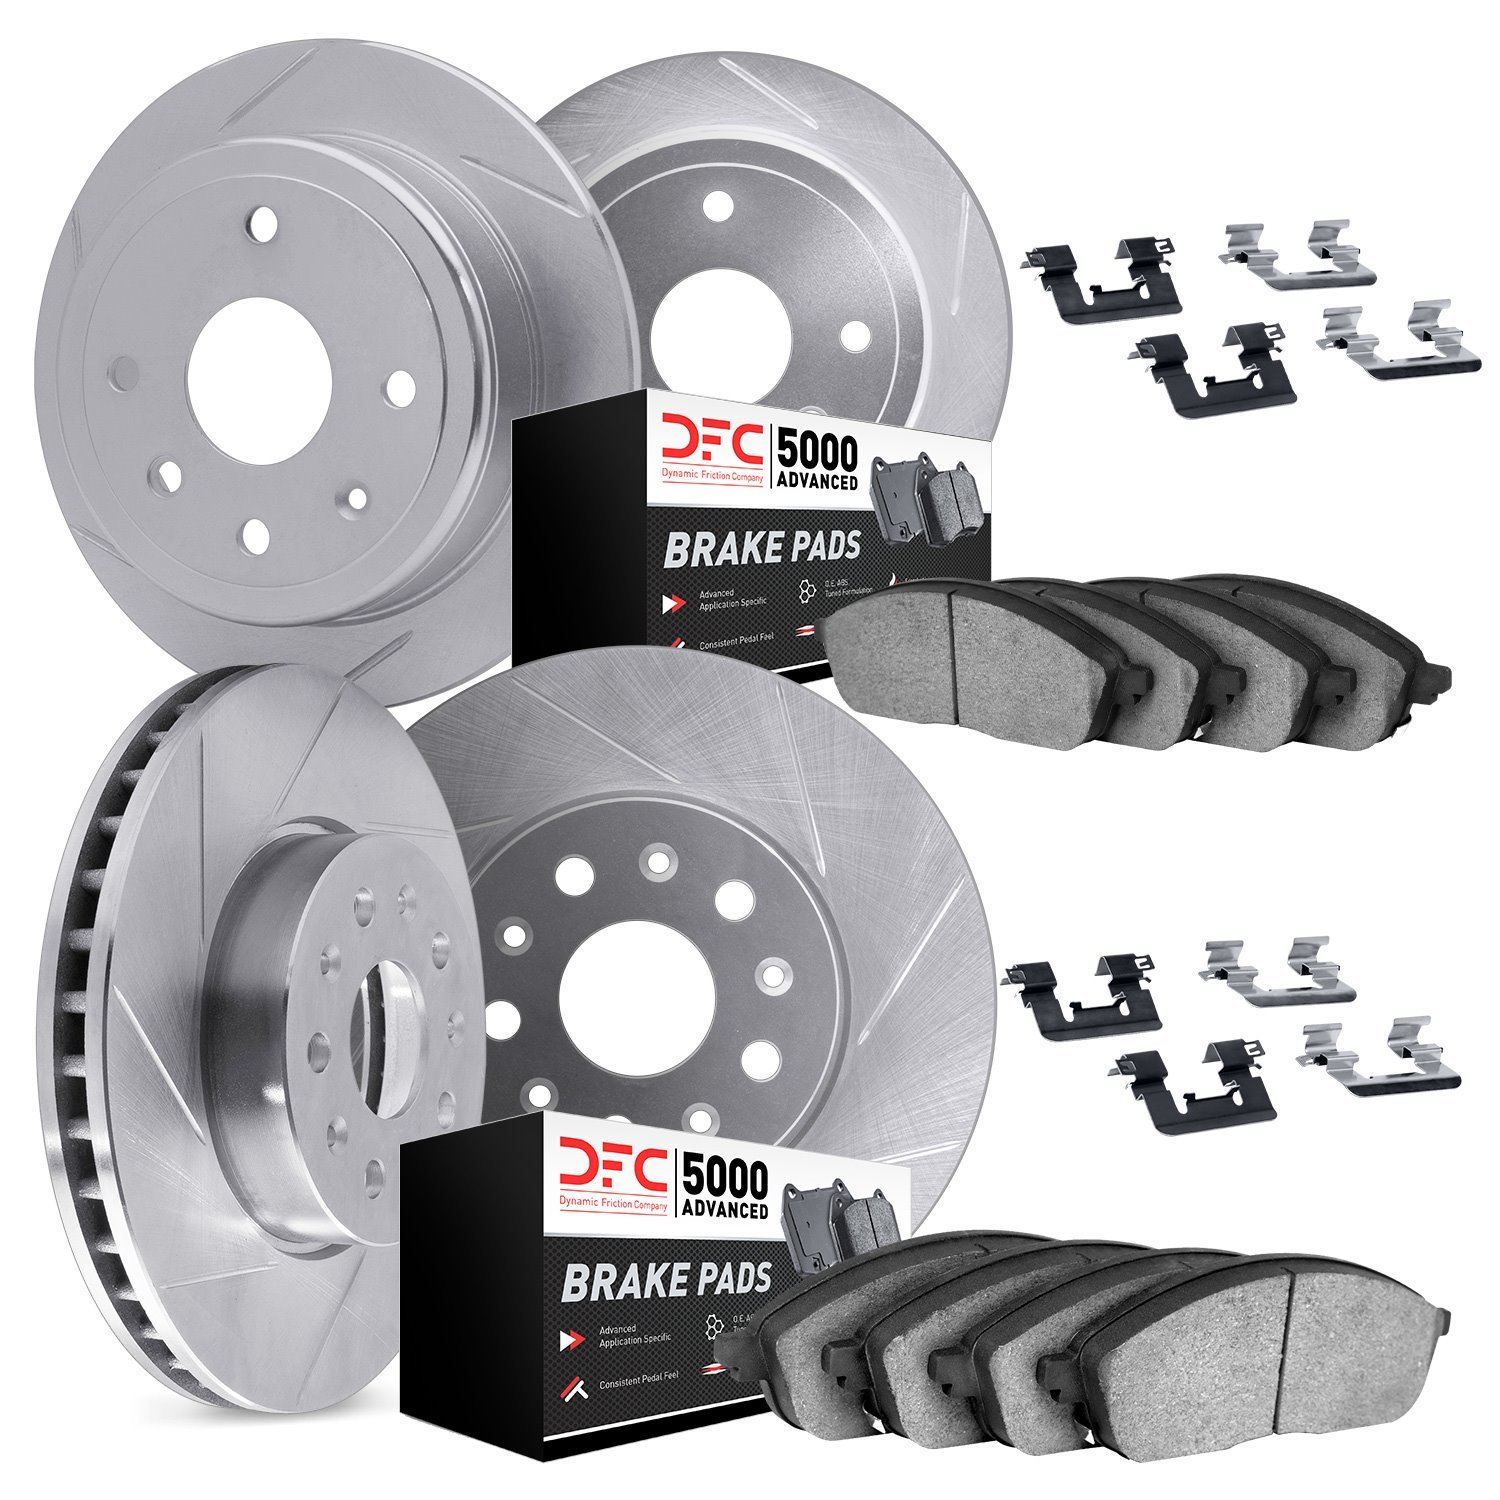 5514-59084 Slotted Brake Rotors w/5000 Advanced Brake Pads Kit & Hardware [Silver], Fits Select Acura/Honda, Position: Front and